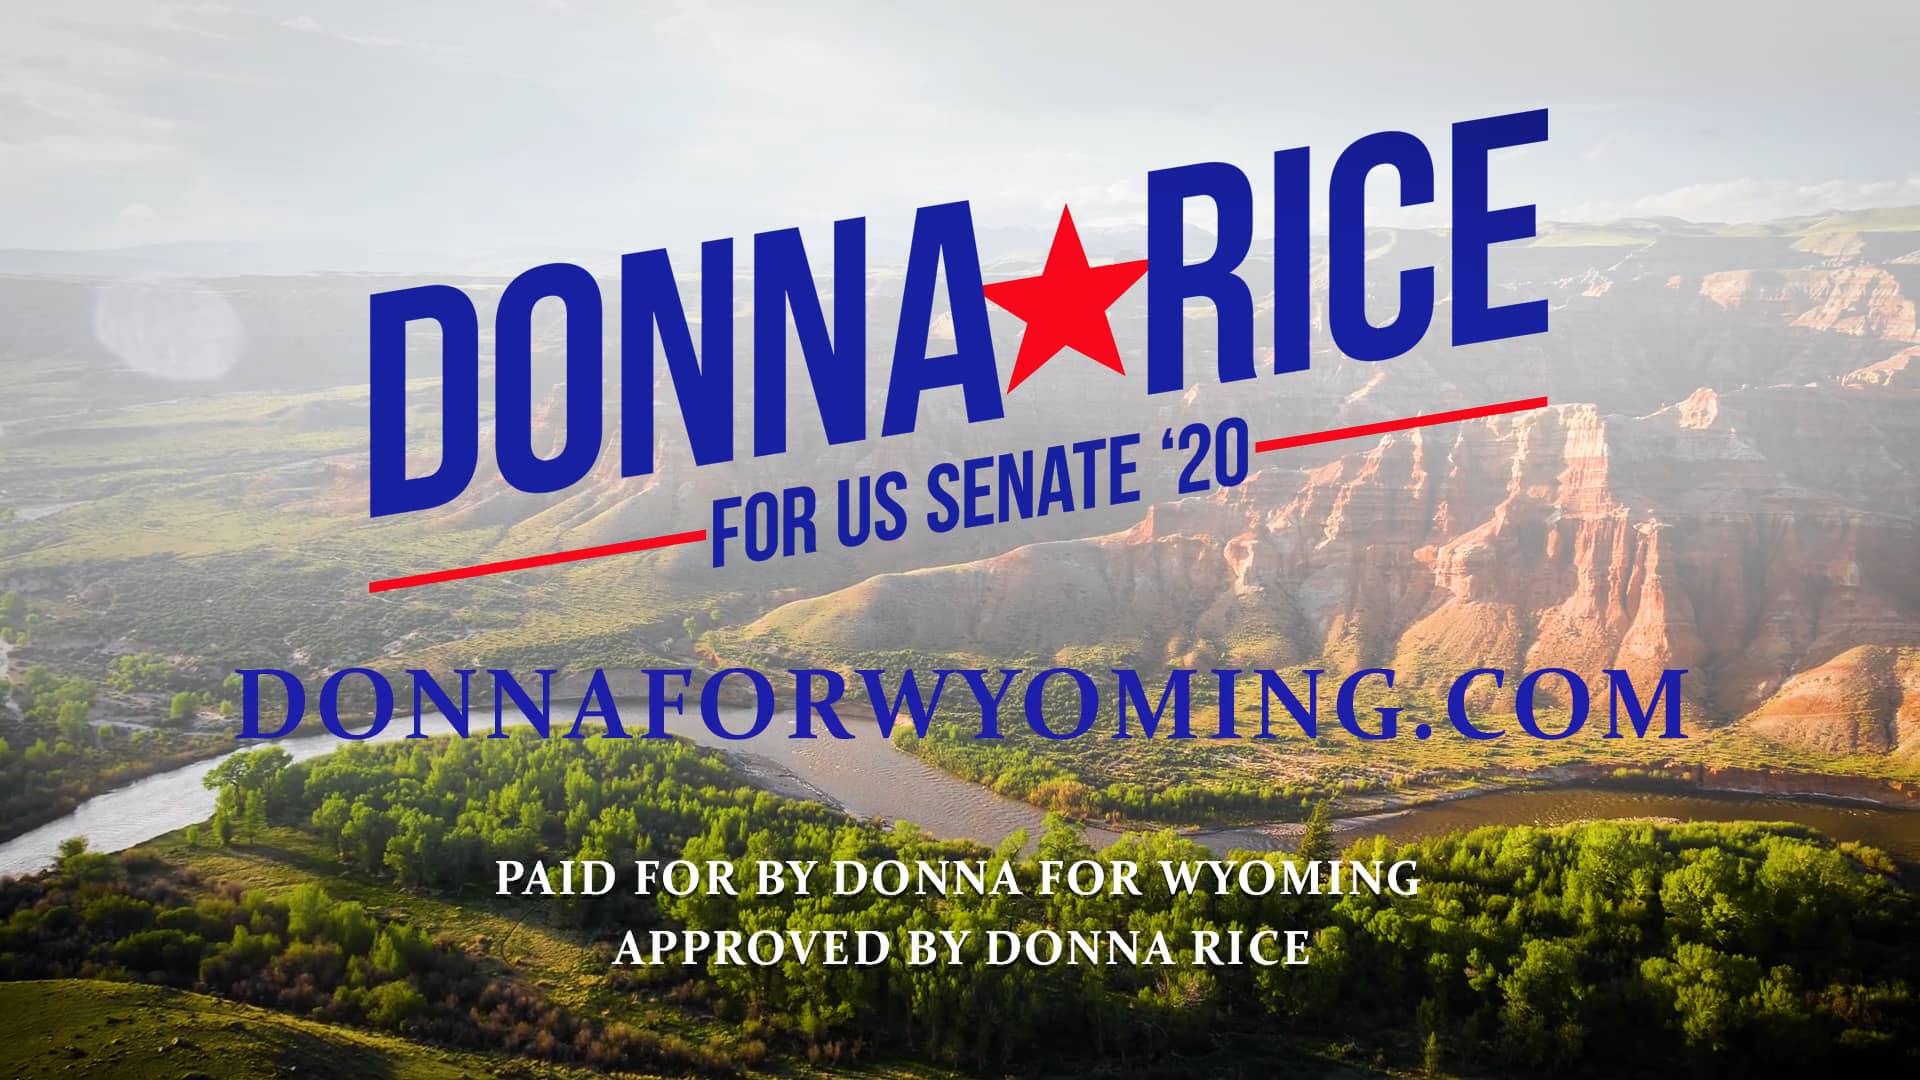 Introducing Donna Rice Candidate for U. S. Senate on Vimeo